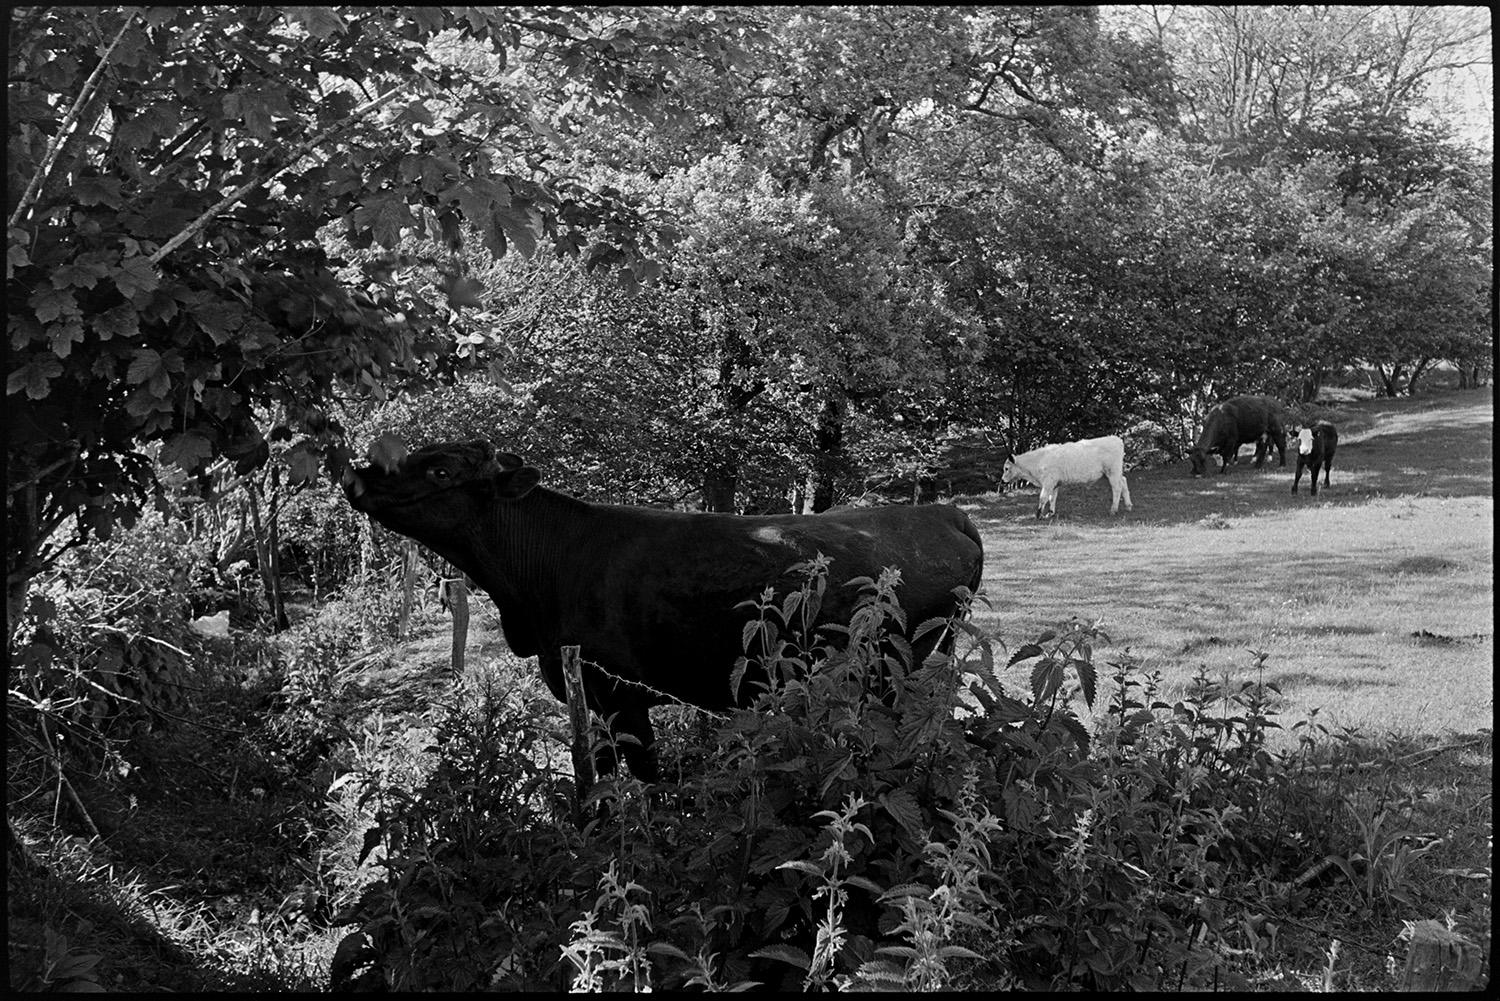 Cow eating leaves from hedge. 
[Cattle grazing in a field at Ashwell, Dolton. The cow in the foreground is reaching over a barbed wire fence to eat leaves from a hedge surrounding the field. Stinging nettles can also be seen in the foreground.]